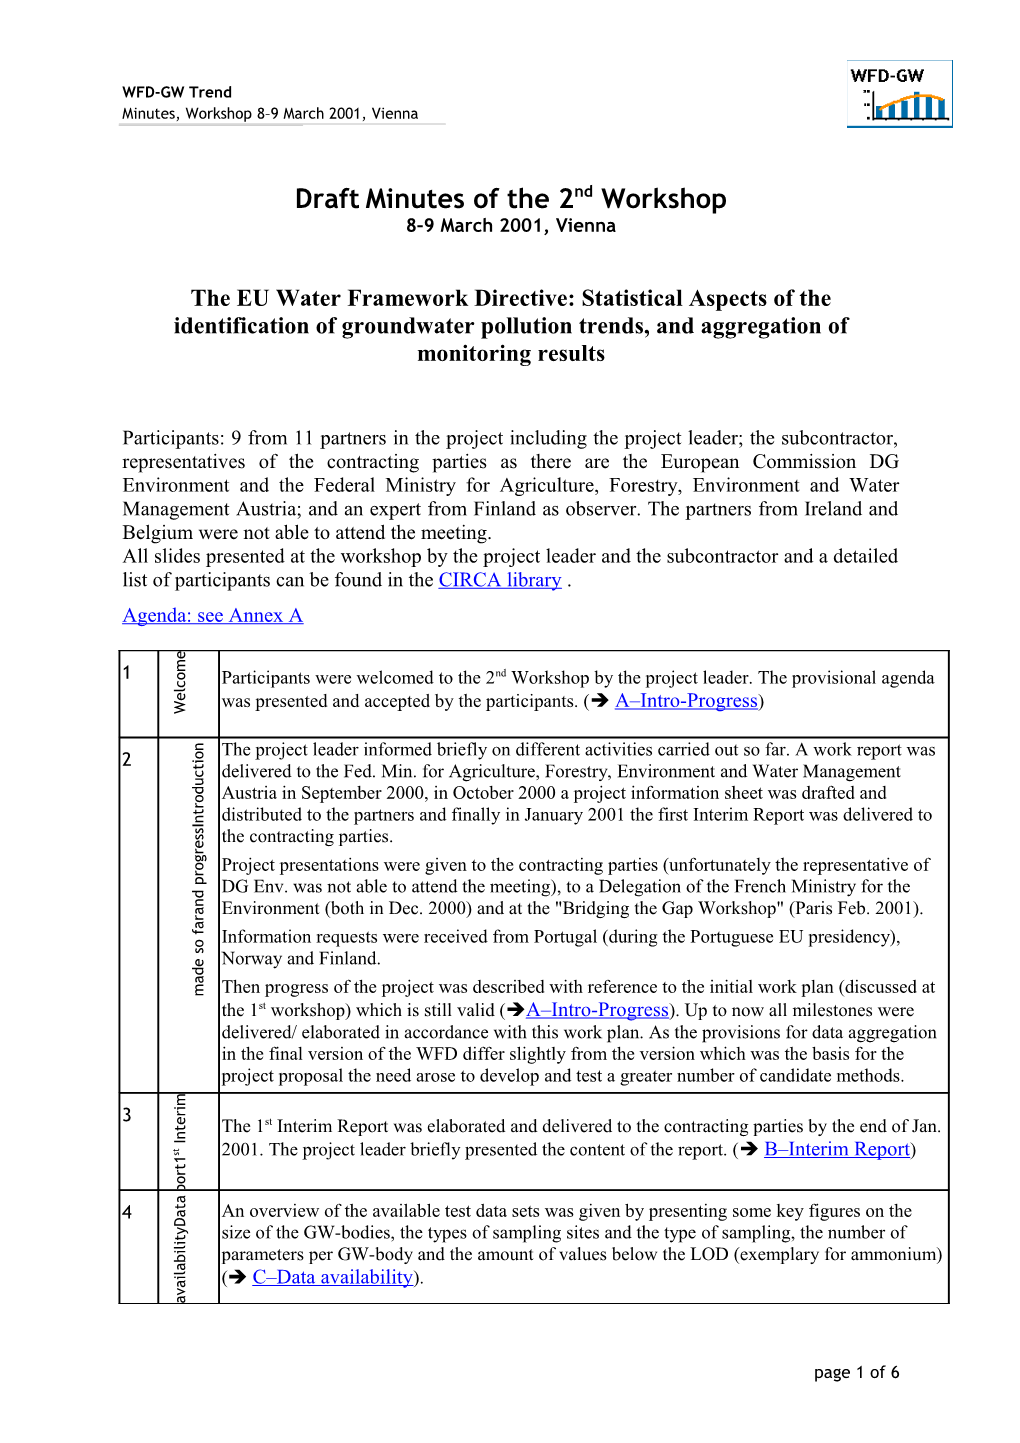 Project: the EU Water Framework Directive: Statistical Aspects of the Identification Of